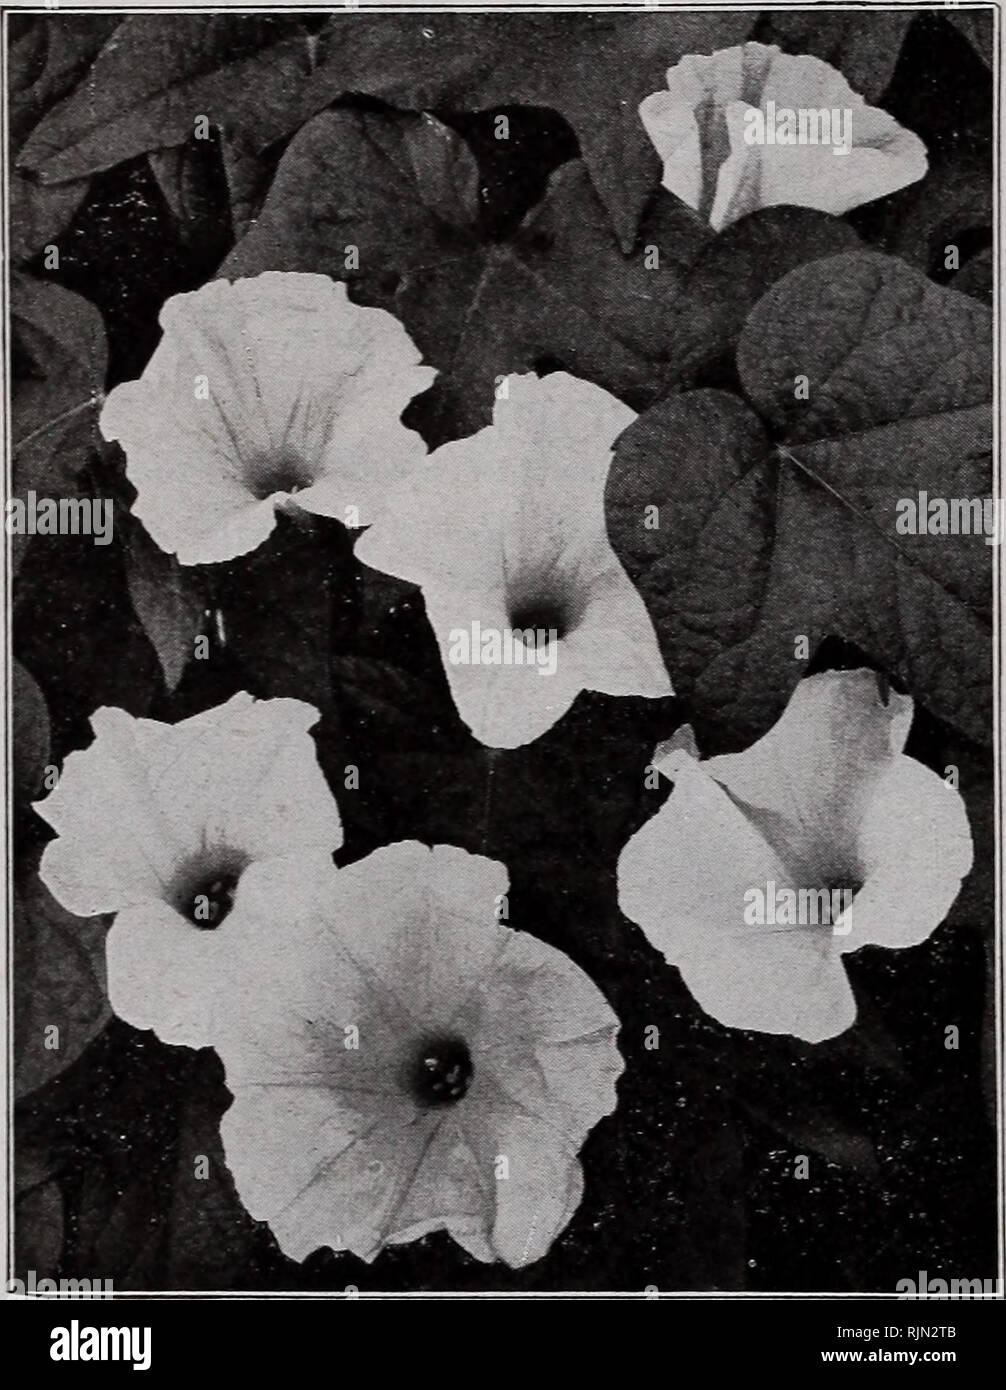 . Barnard's seeds, bulbs, shrubs 1923. Seeds Catalogs; Vegetables Seeds Catalogs; Flowers Seeds Catalogs; Fruit Seeds Catalogs; Nurseries (Horticulture) Catalogs. 60 The W. W. Barnard Co., 231-235 W. Madison St., Chicago ICE PLANT Tender annual of drooping habit. Useful in baskets and vases. Has peculiar leaves covered with small pustules. 3155—Crystallinum. Fine for pots 10c IMPATIENS (Zanzibar Balsam) G. P. 1 foot. Valuable for pot culture as well as bedding. The delicate flowers are very pretty and constantly in bloom. 3160— Holstii. Vermilion 10c 3161— Sultani. Bright rose 10c 3166—Sultani Stock Photo